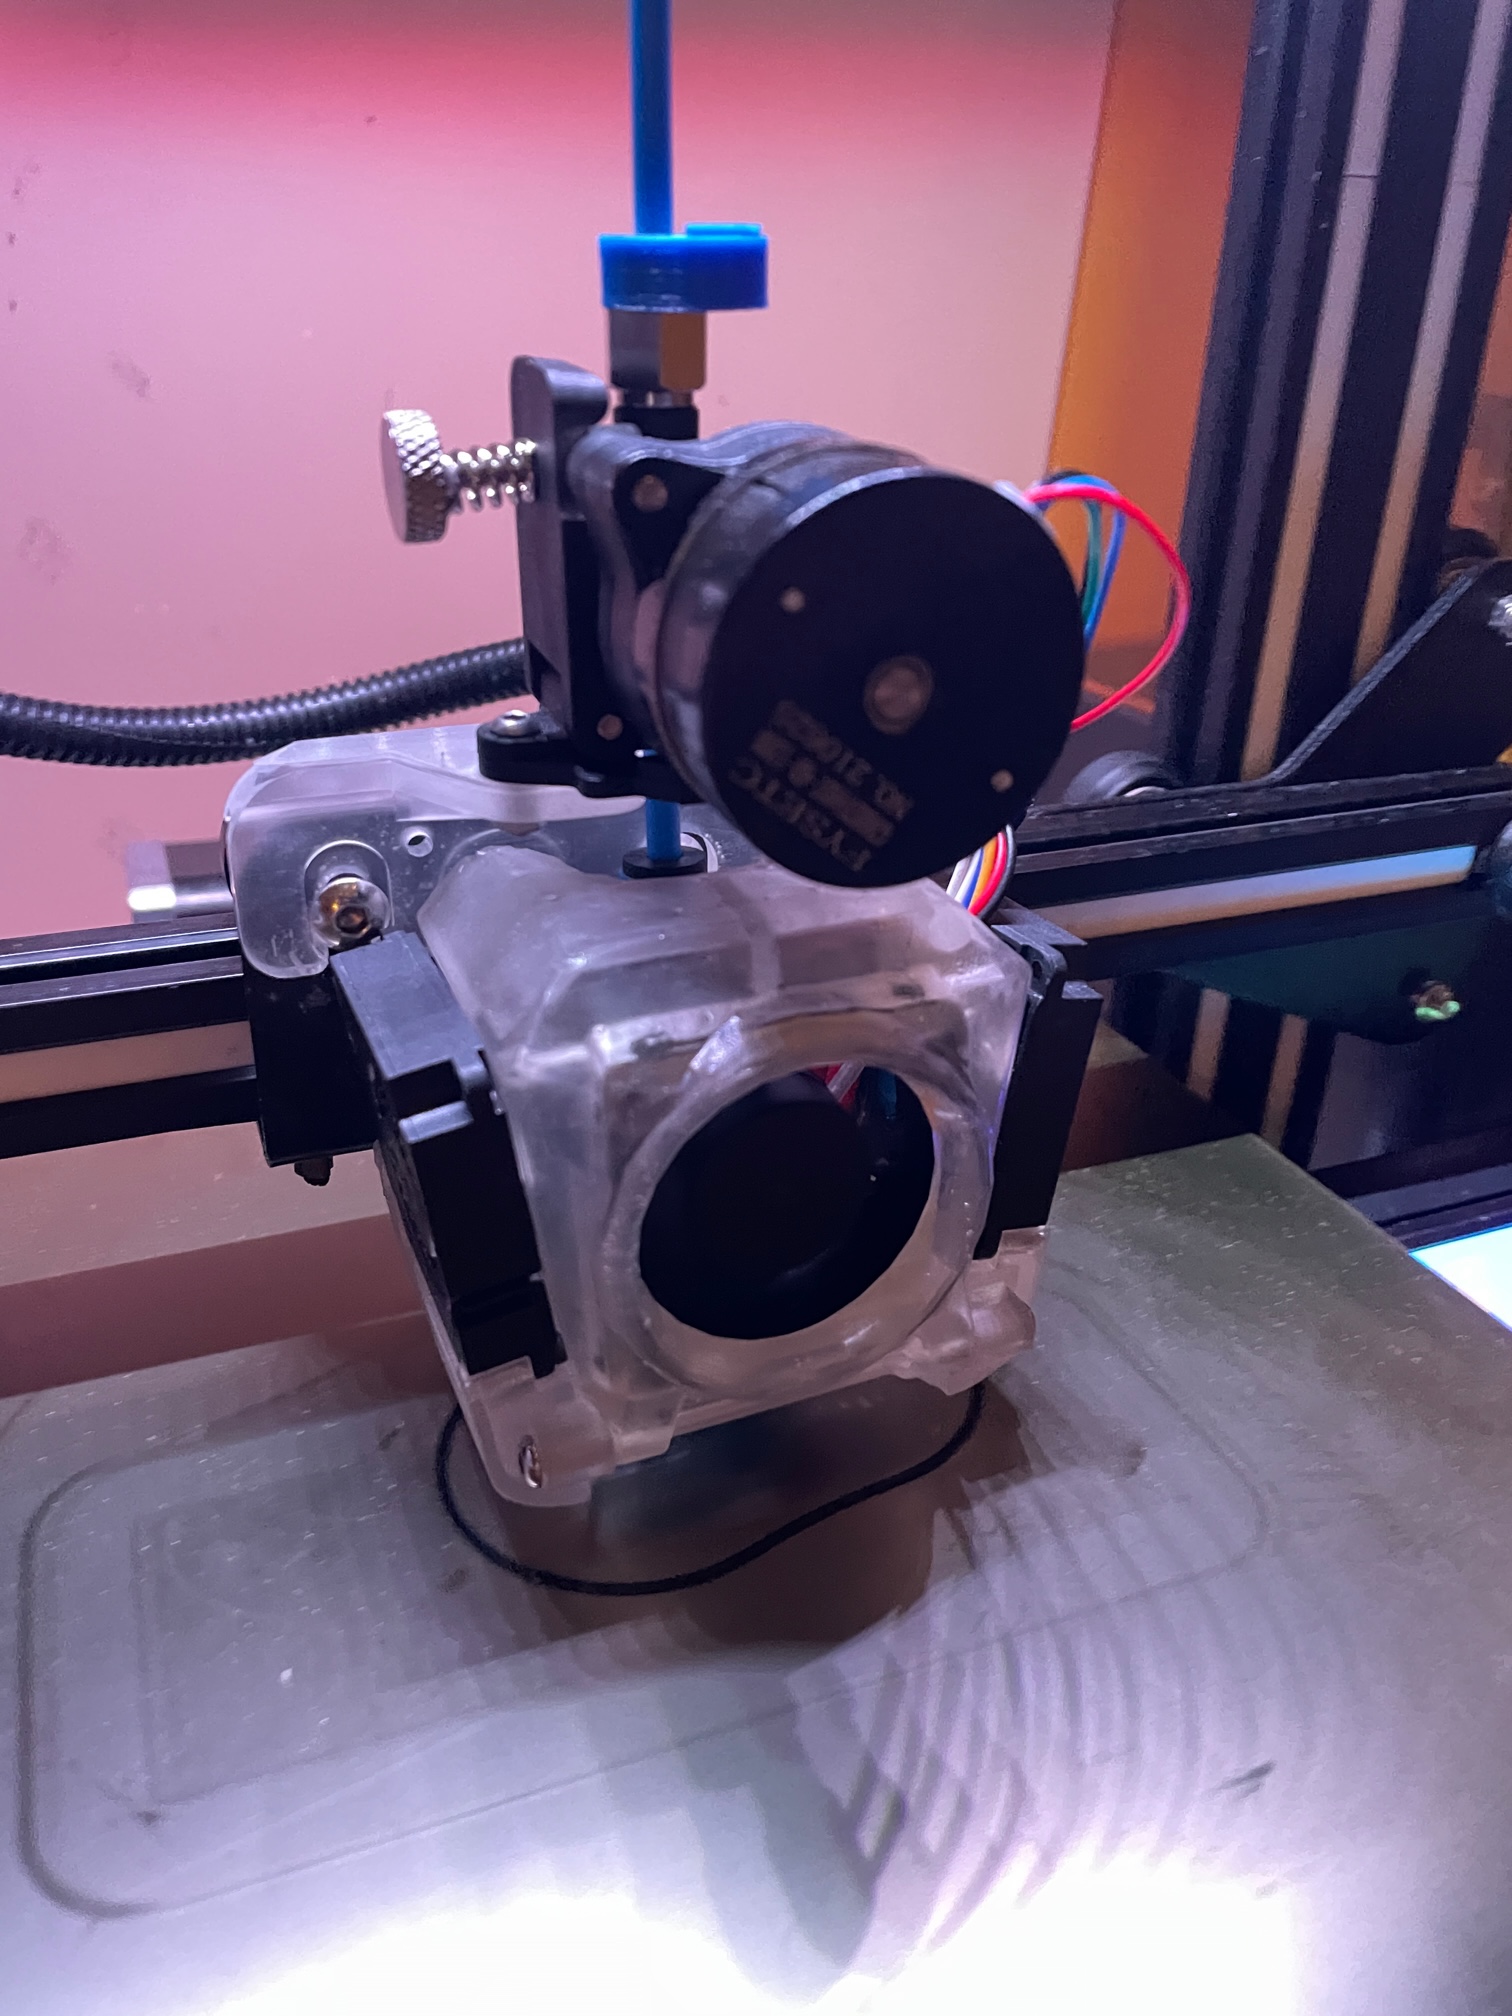 Direct Drive Ender 3 Orbiter Extruder Mount and Dual Blower Shroud